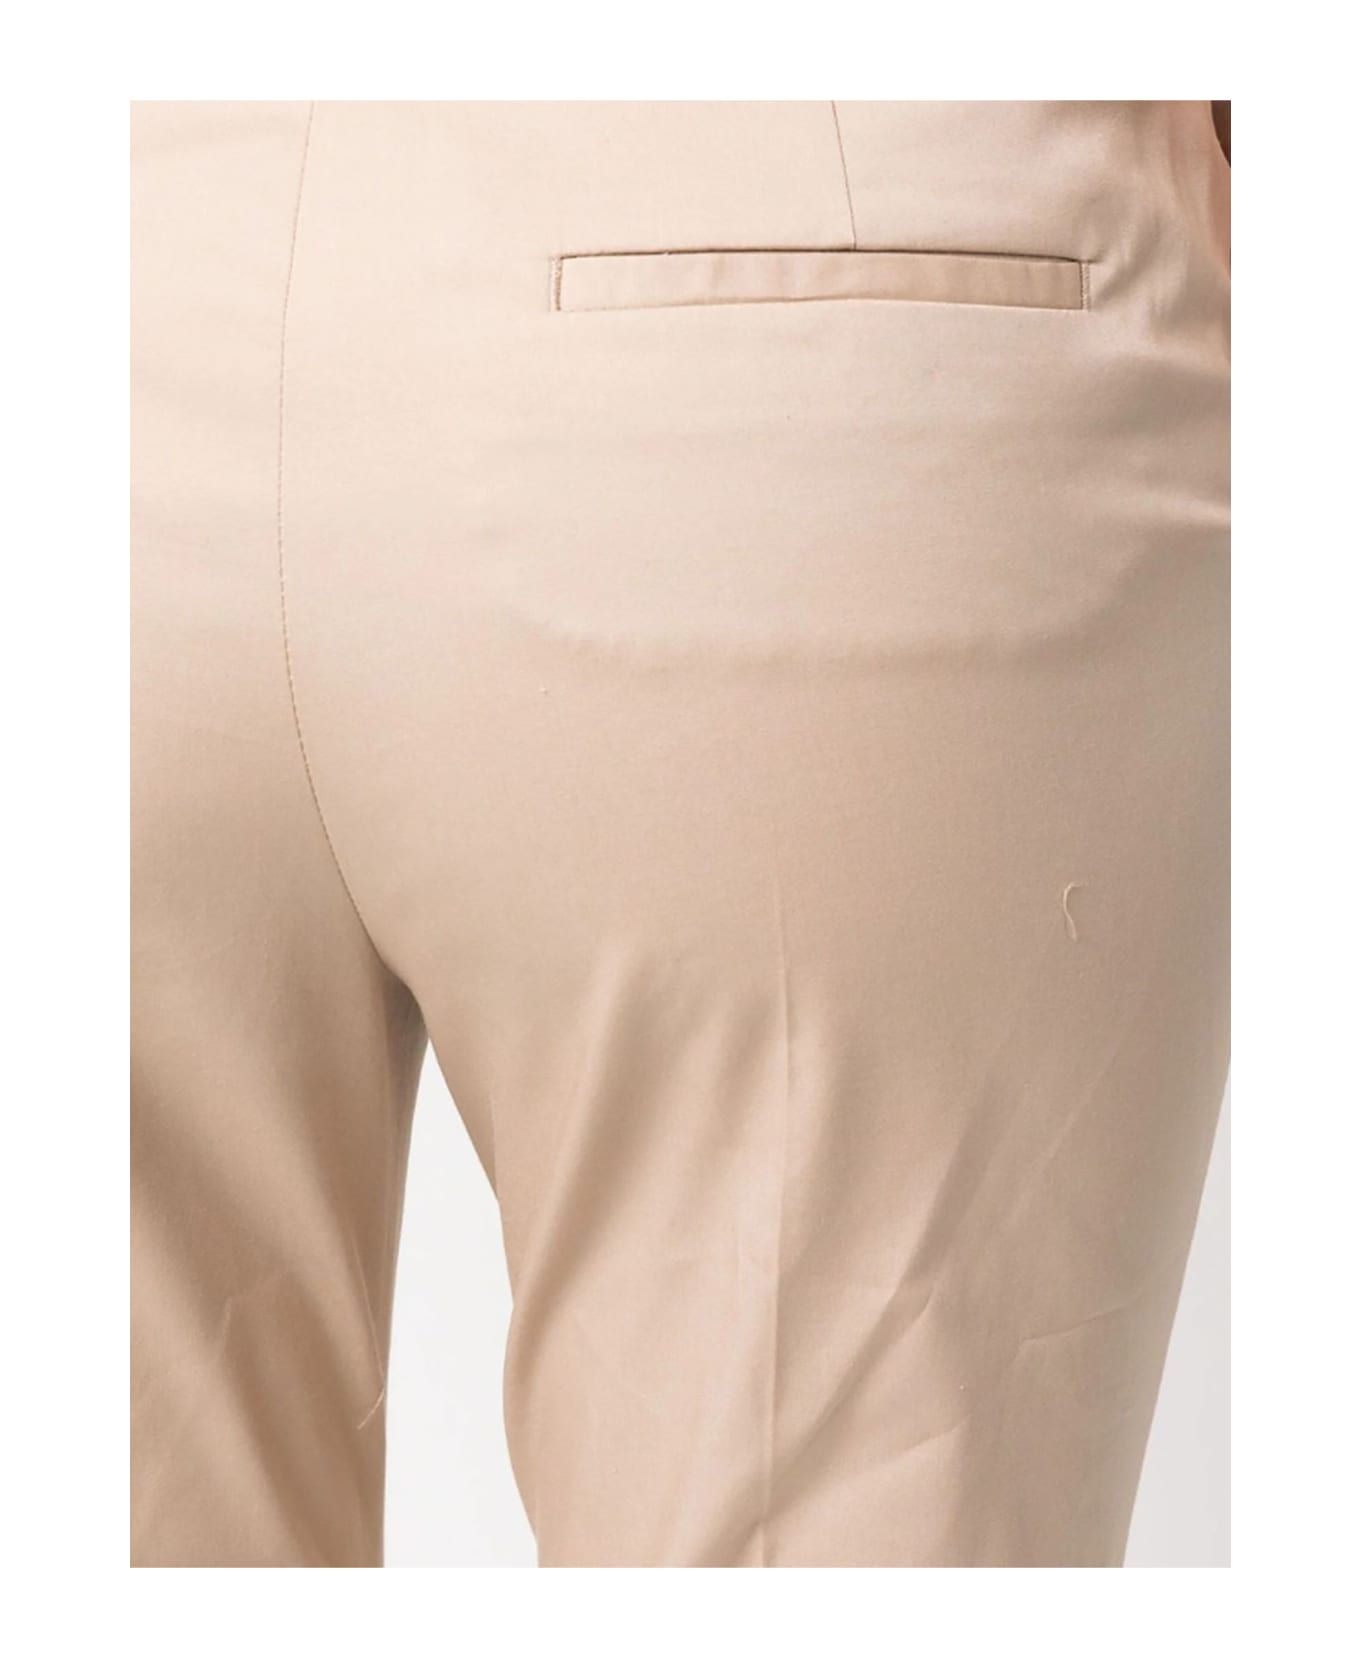 Peserico Mid-rise Tailored Trousers Beige - Beige